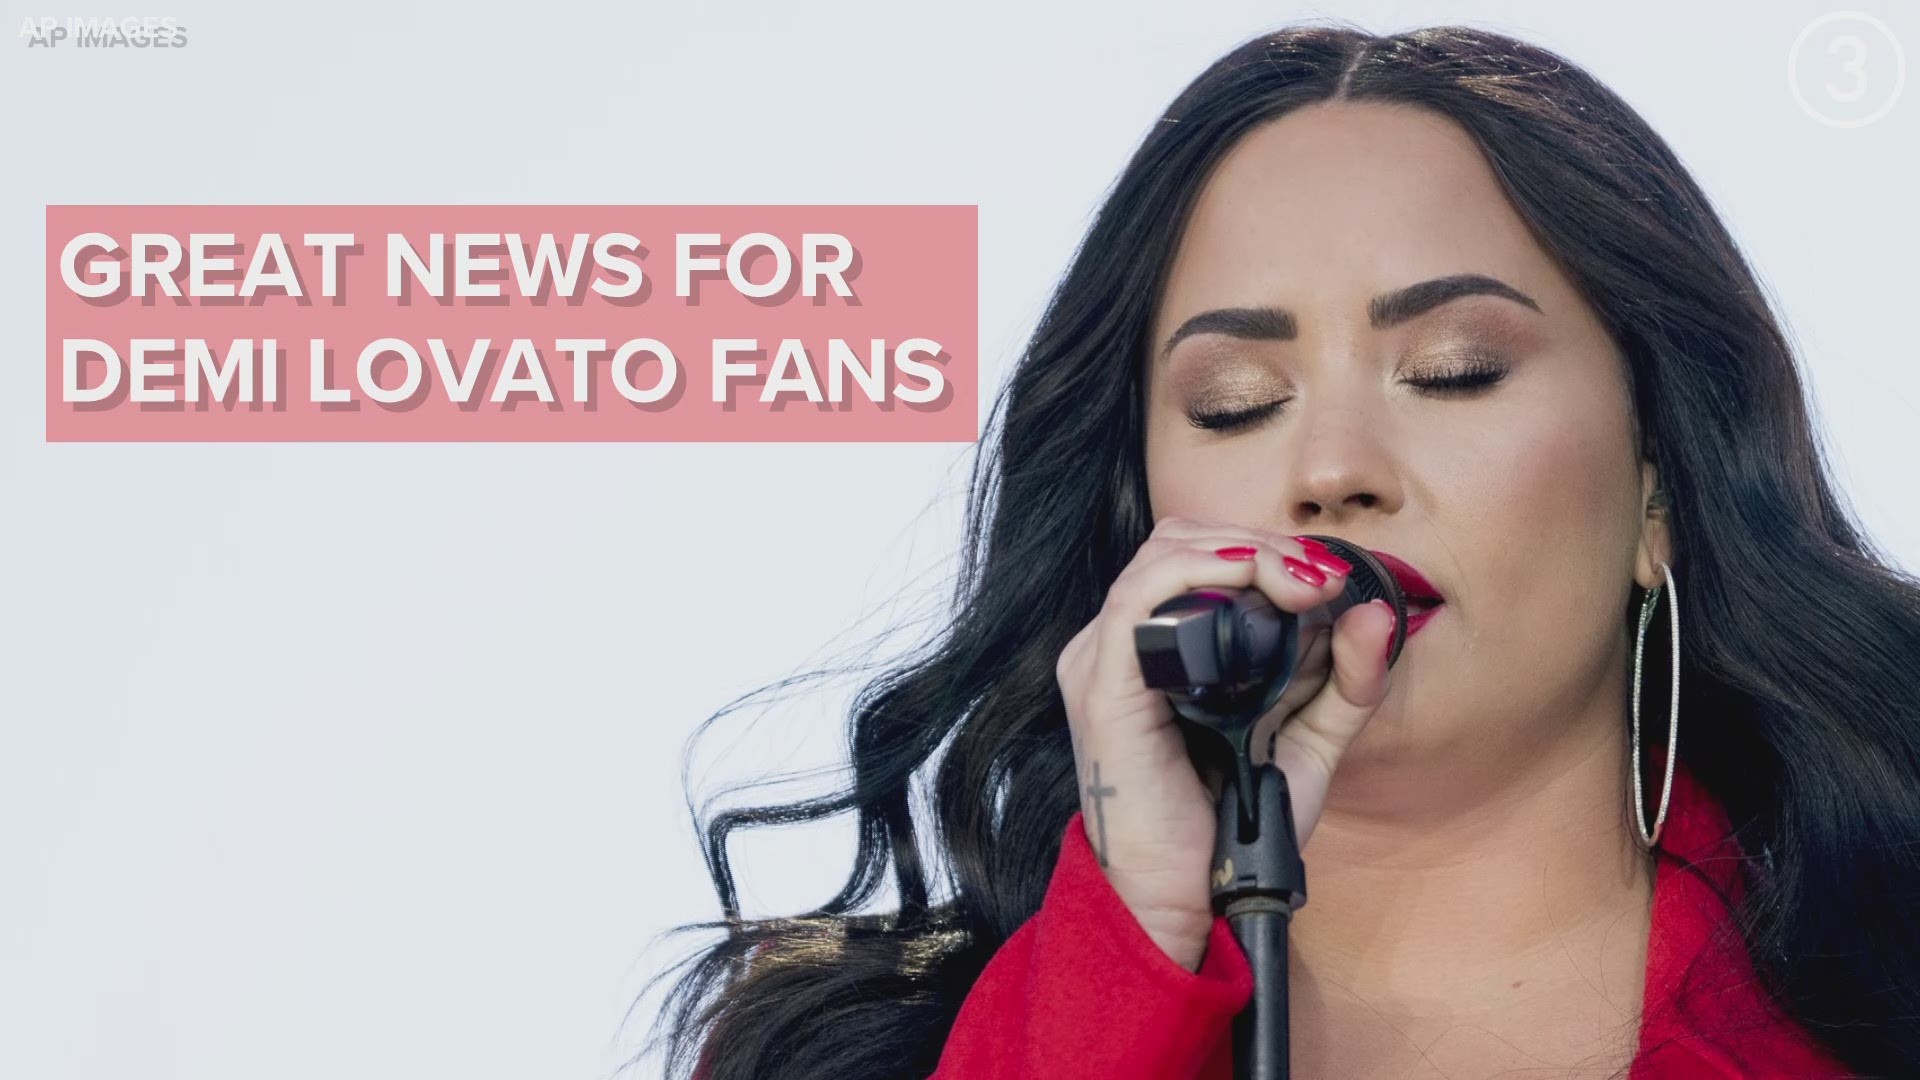 Super Bowl 2020 is set to be a star-studded event with its latest announcement!  Demi Lovato will be singing the national anthem.